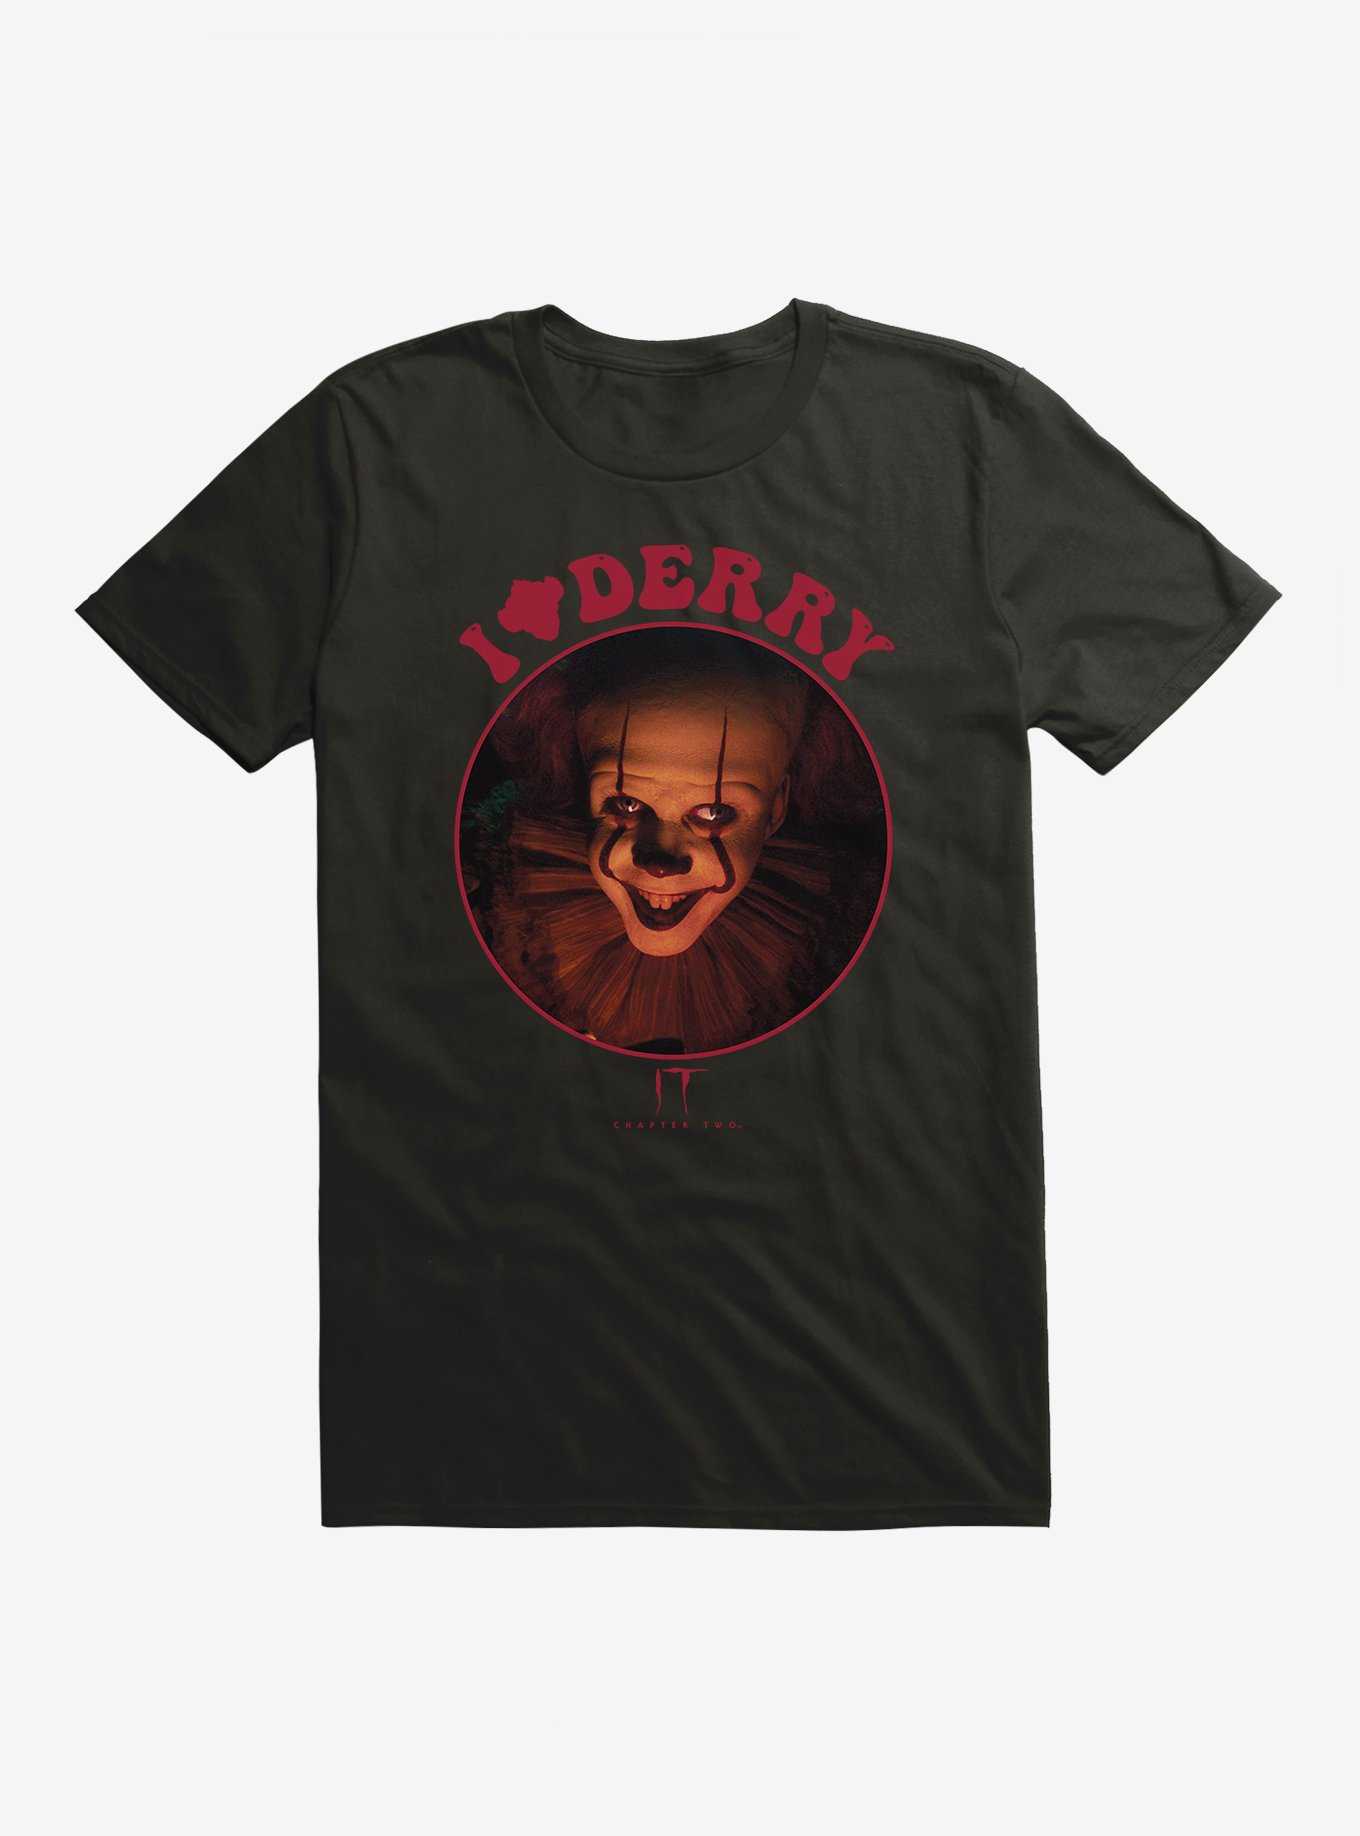 IT Chapter TwoI Pennywise Derry T-Shirt, , hi-res